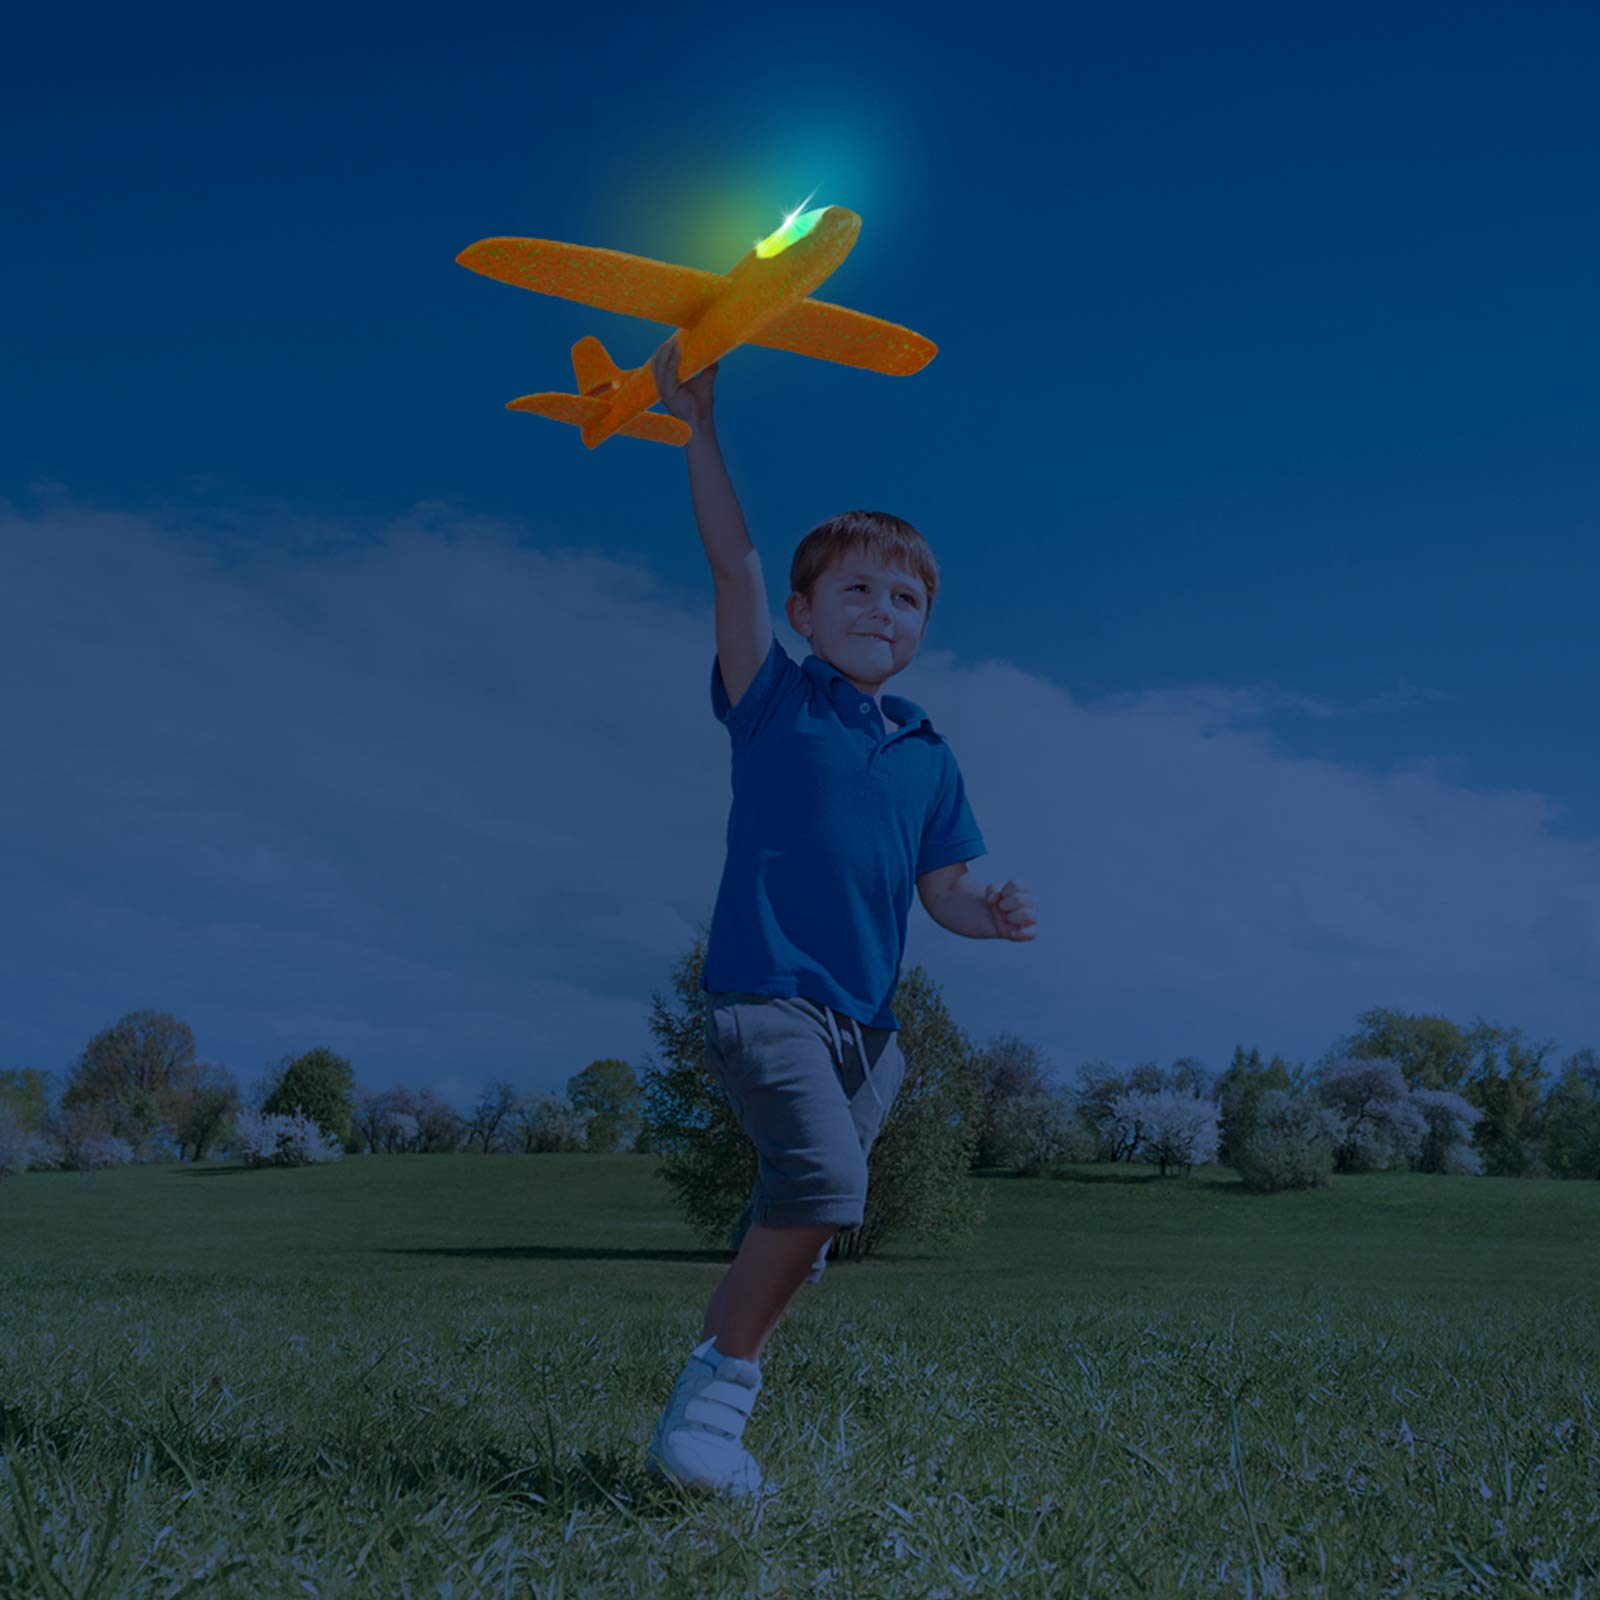 2 Pack LED Light Airplane,17.5" Large Throwing Foam Plane,2 Flight Mode Glider Plane,Flying Toy for Kids,Gifts for 3 4 5 6 7 8 9 Years Old Boy,Outdoor Sport Toys Birthday Party Favors Foam Airplane